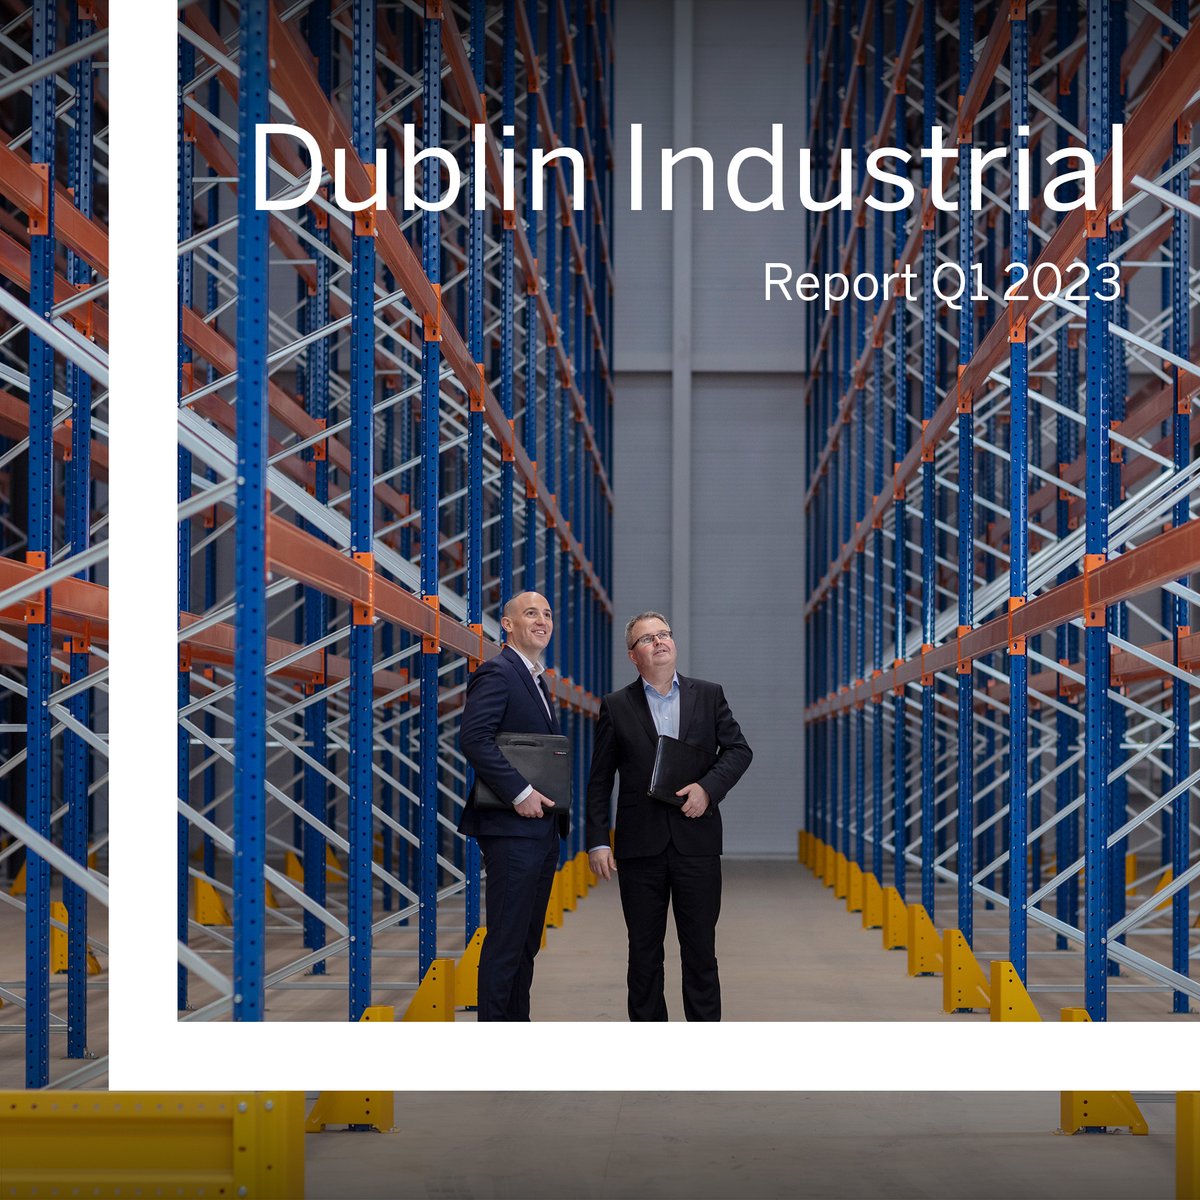 Despite the ongoing macroeconomic adjustments globally, the Dublin industrial market performed very well in Q1 2023: bit.ly/43g4OWC

#research #industrialproperty #irishproperty #cre #logistics